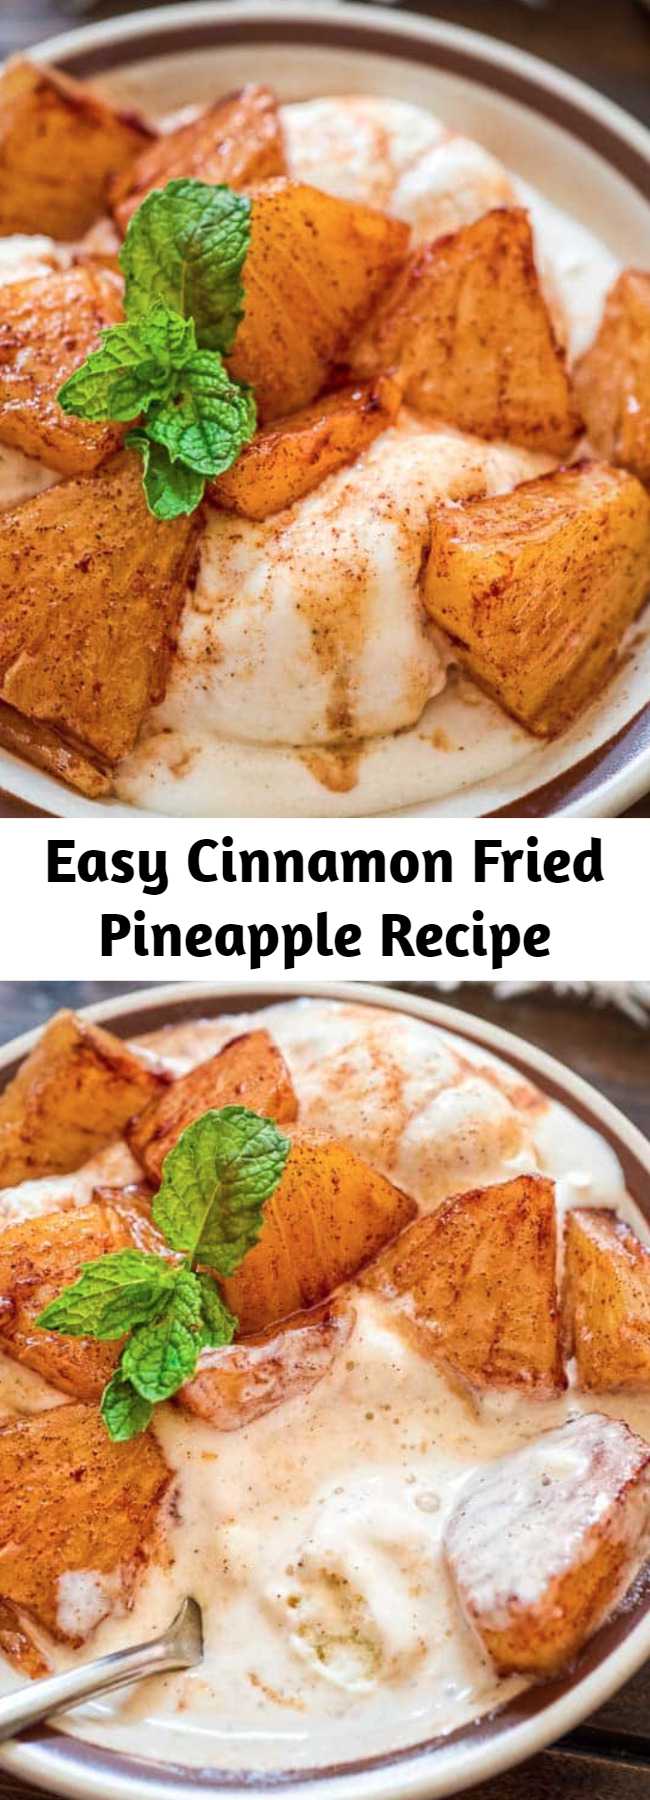 Easy Cinnamon Fried Pineapple Recipe - Try this simple, yet scrumptious Cinnamon Fried Pineapple. It requires just a few common ingredients and only 10 minutes of your time. #pineapple #cinnamon #dessert #icecream